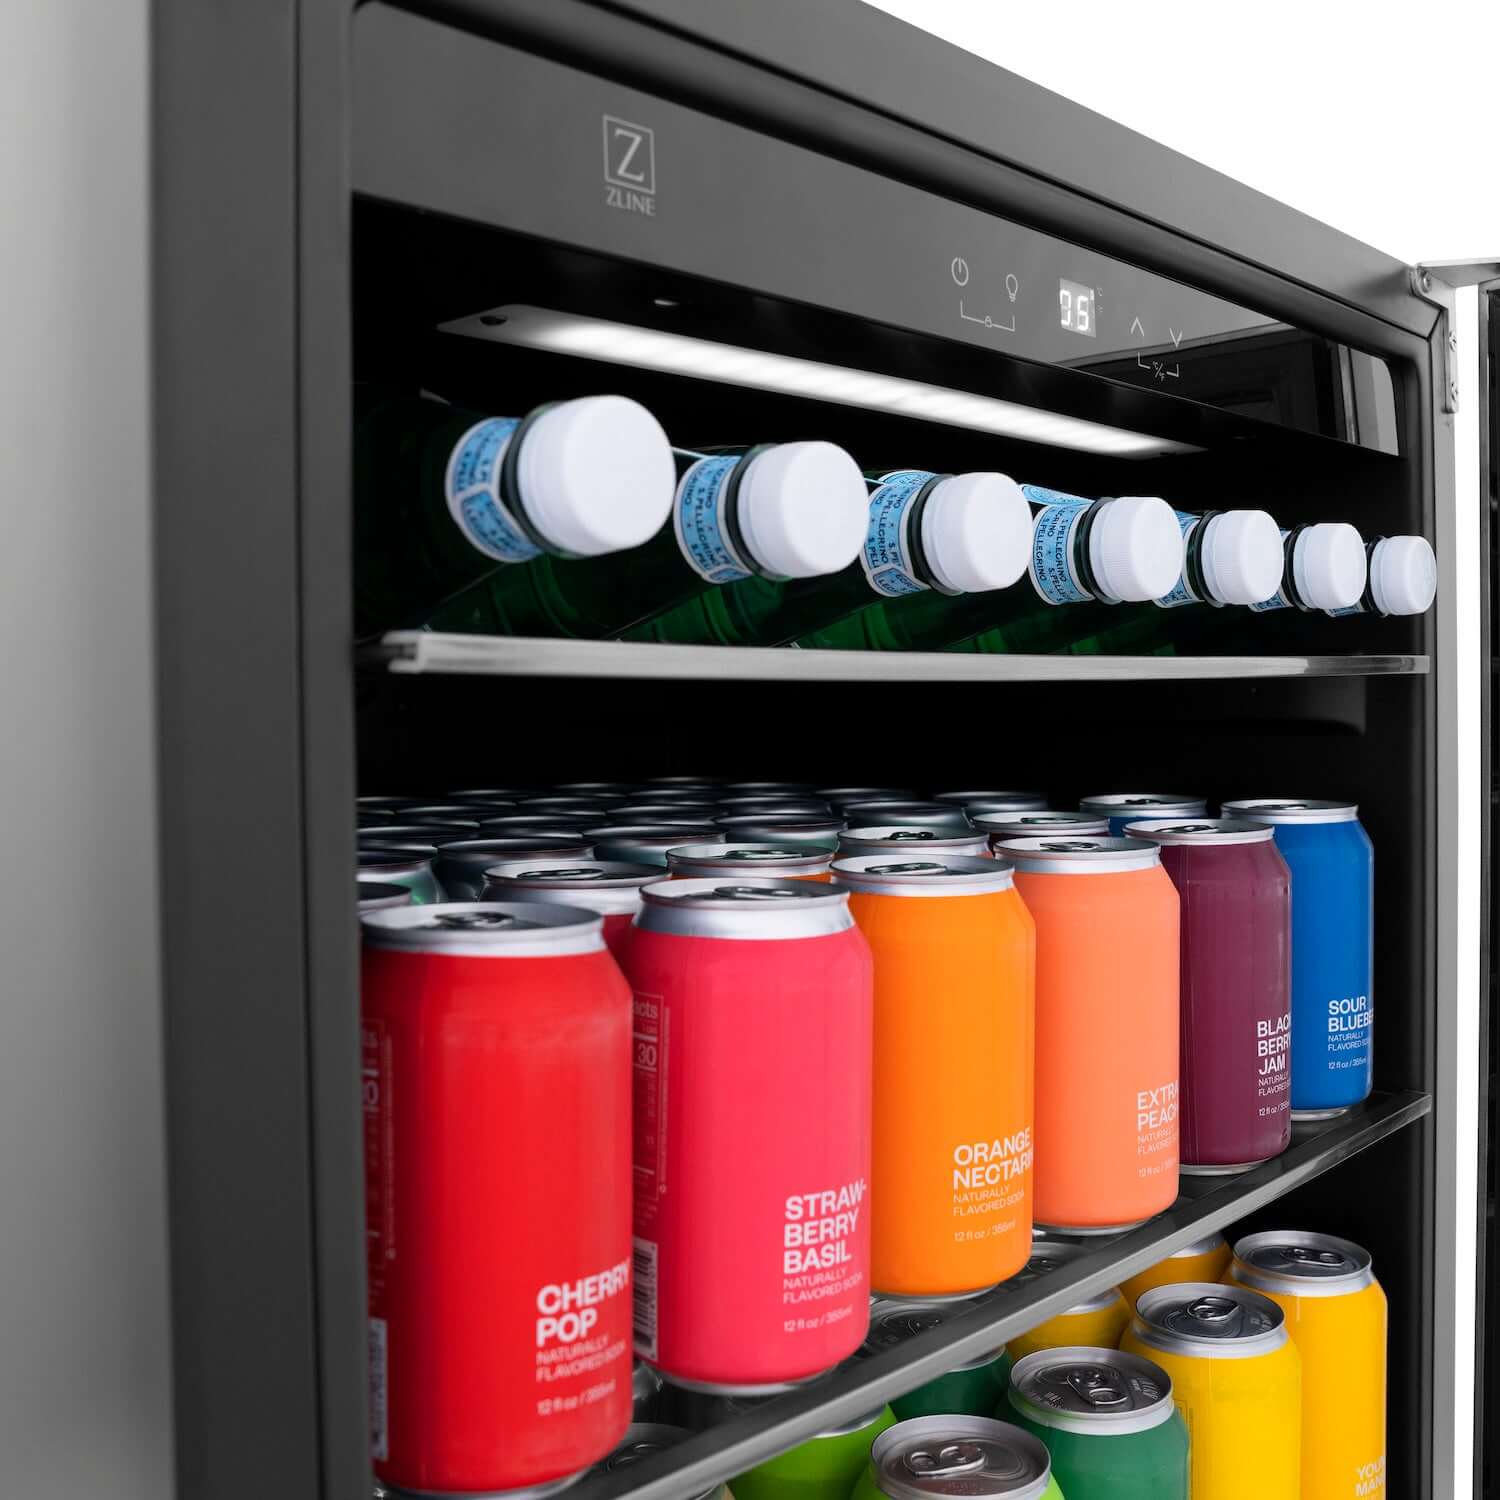 ZLINE beverage center with 3 levels of colorful drinks inside close up of top and middle shelves.